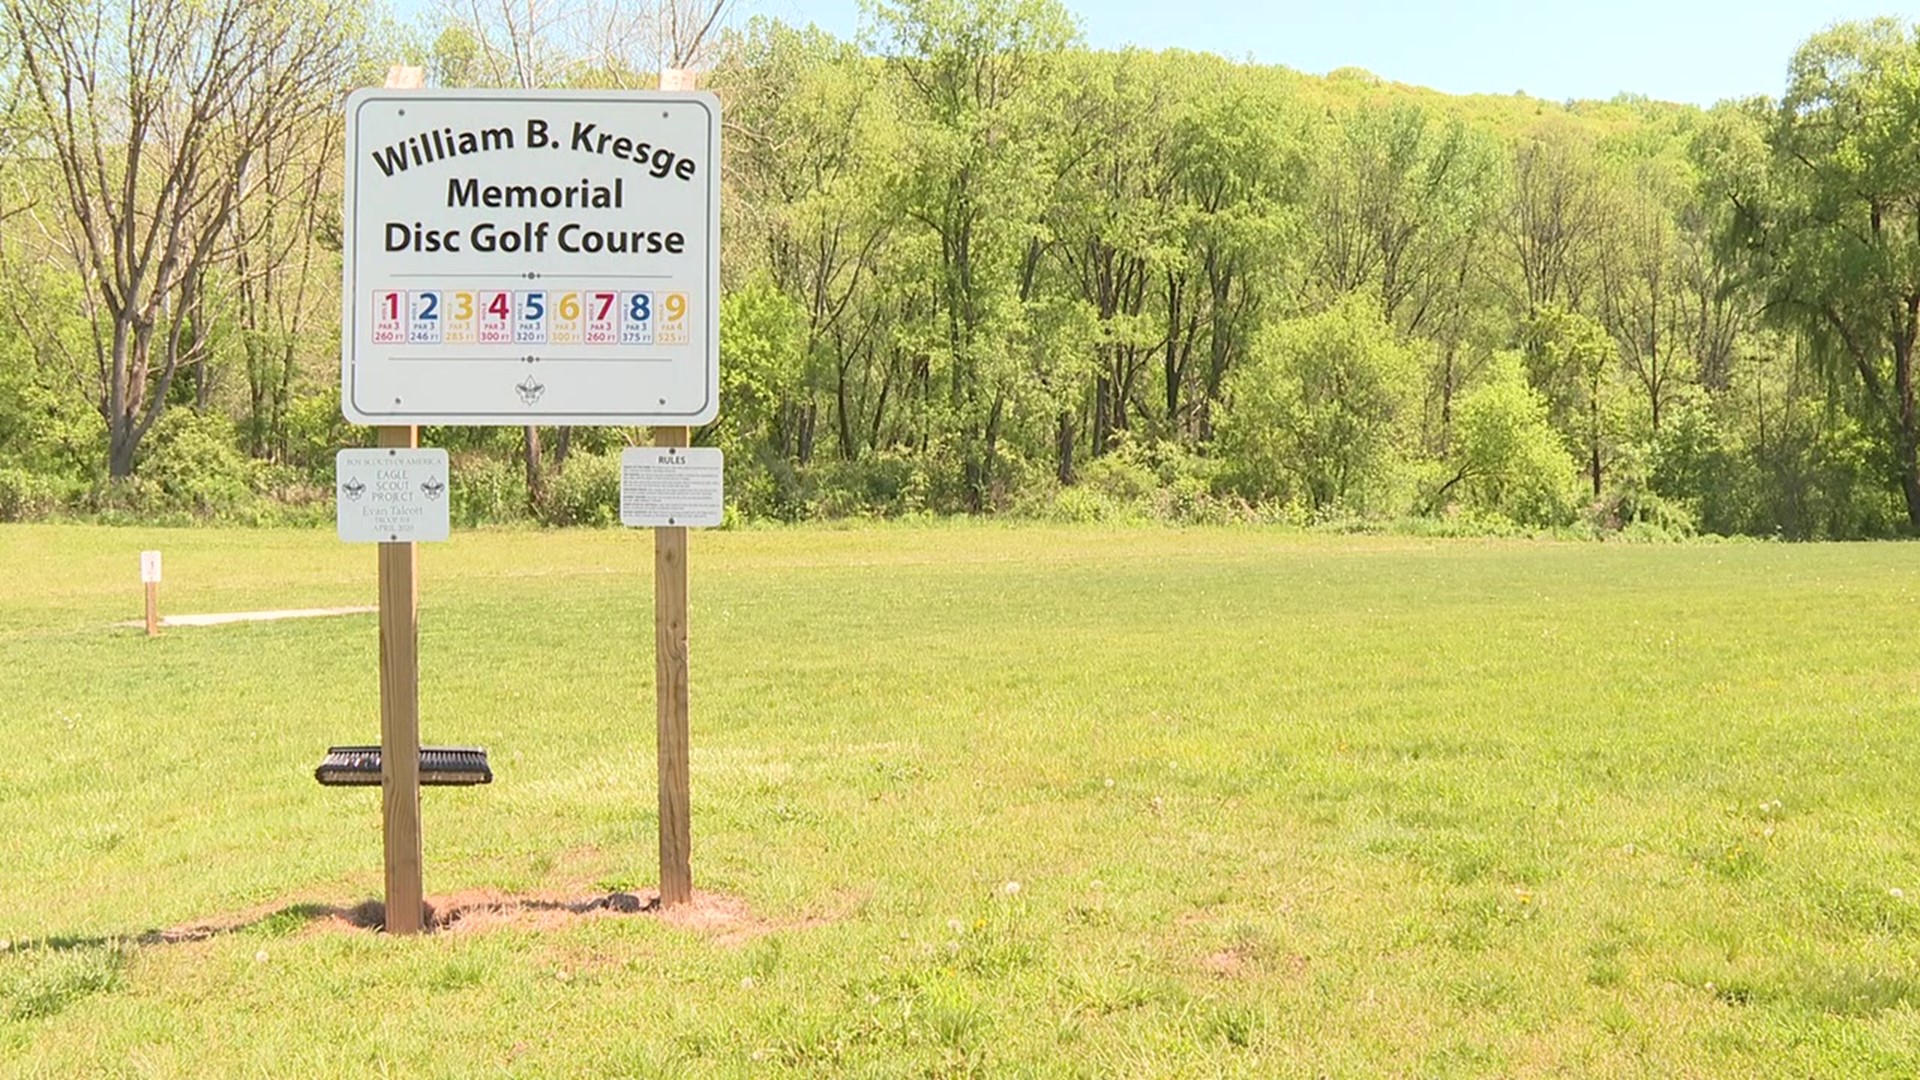 Disc golf memorial tournament to be held in Wyoming County